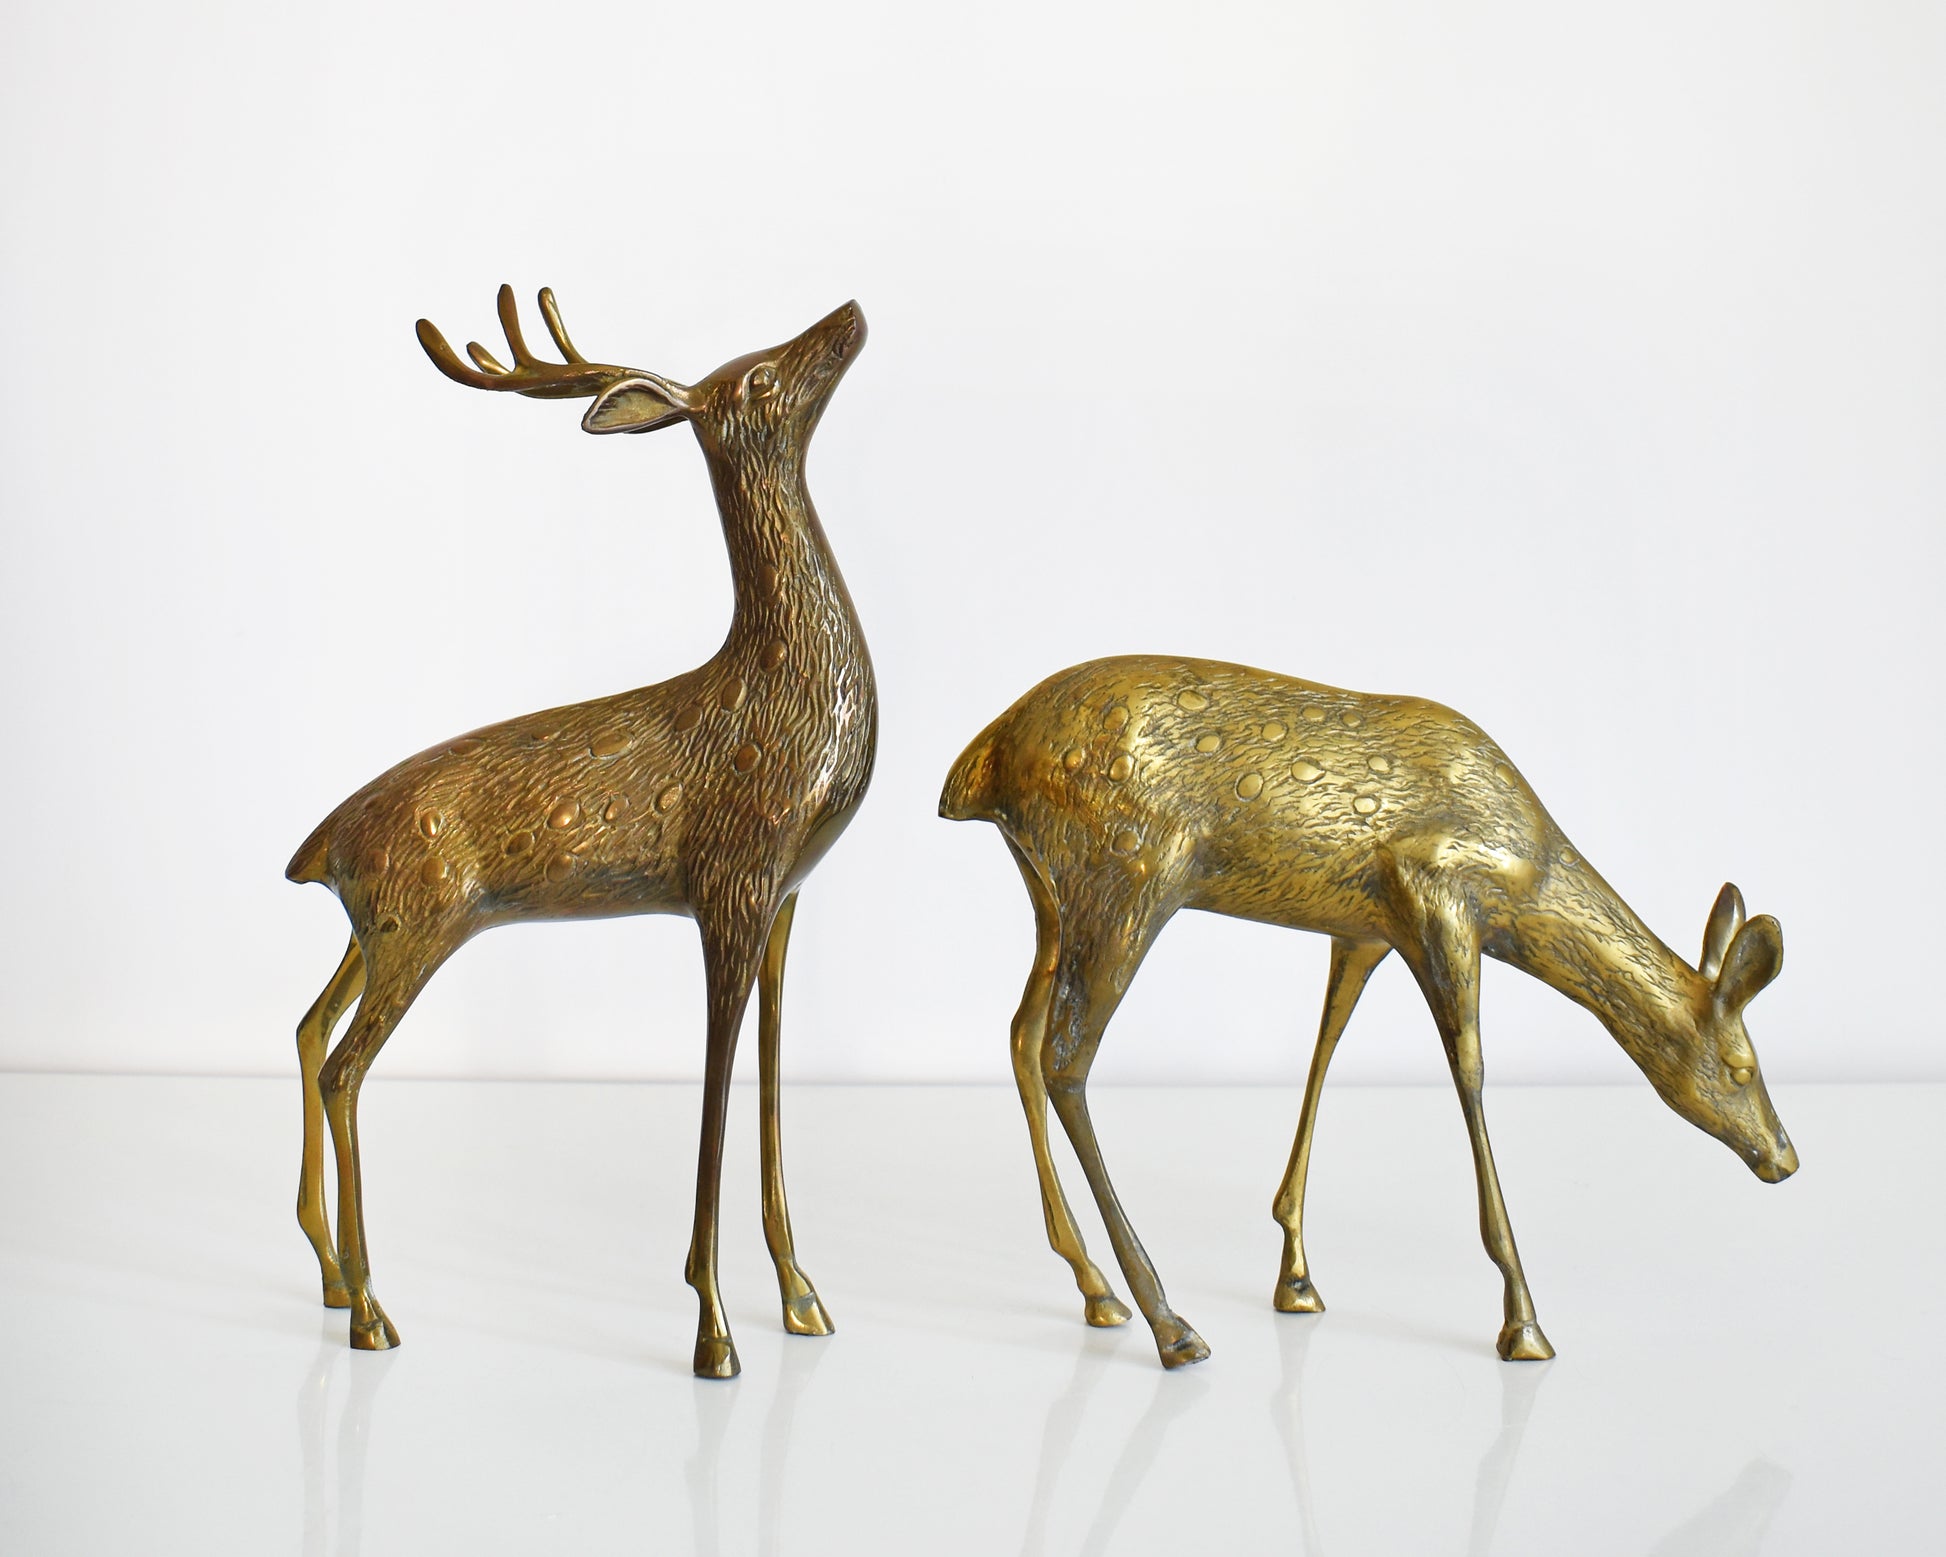 Two vintage brass deers standing on a white table and white background. The buck is standing upright displaying his antlers and the doe is grazing on the ground. Both of the deer have excellent fur and spotted detail.